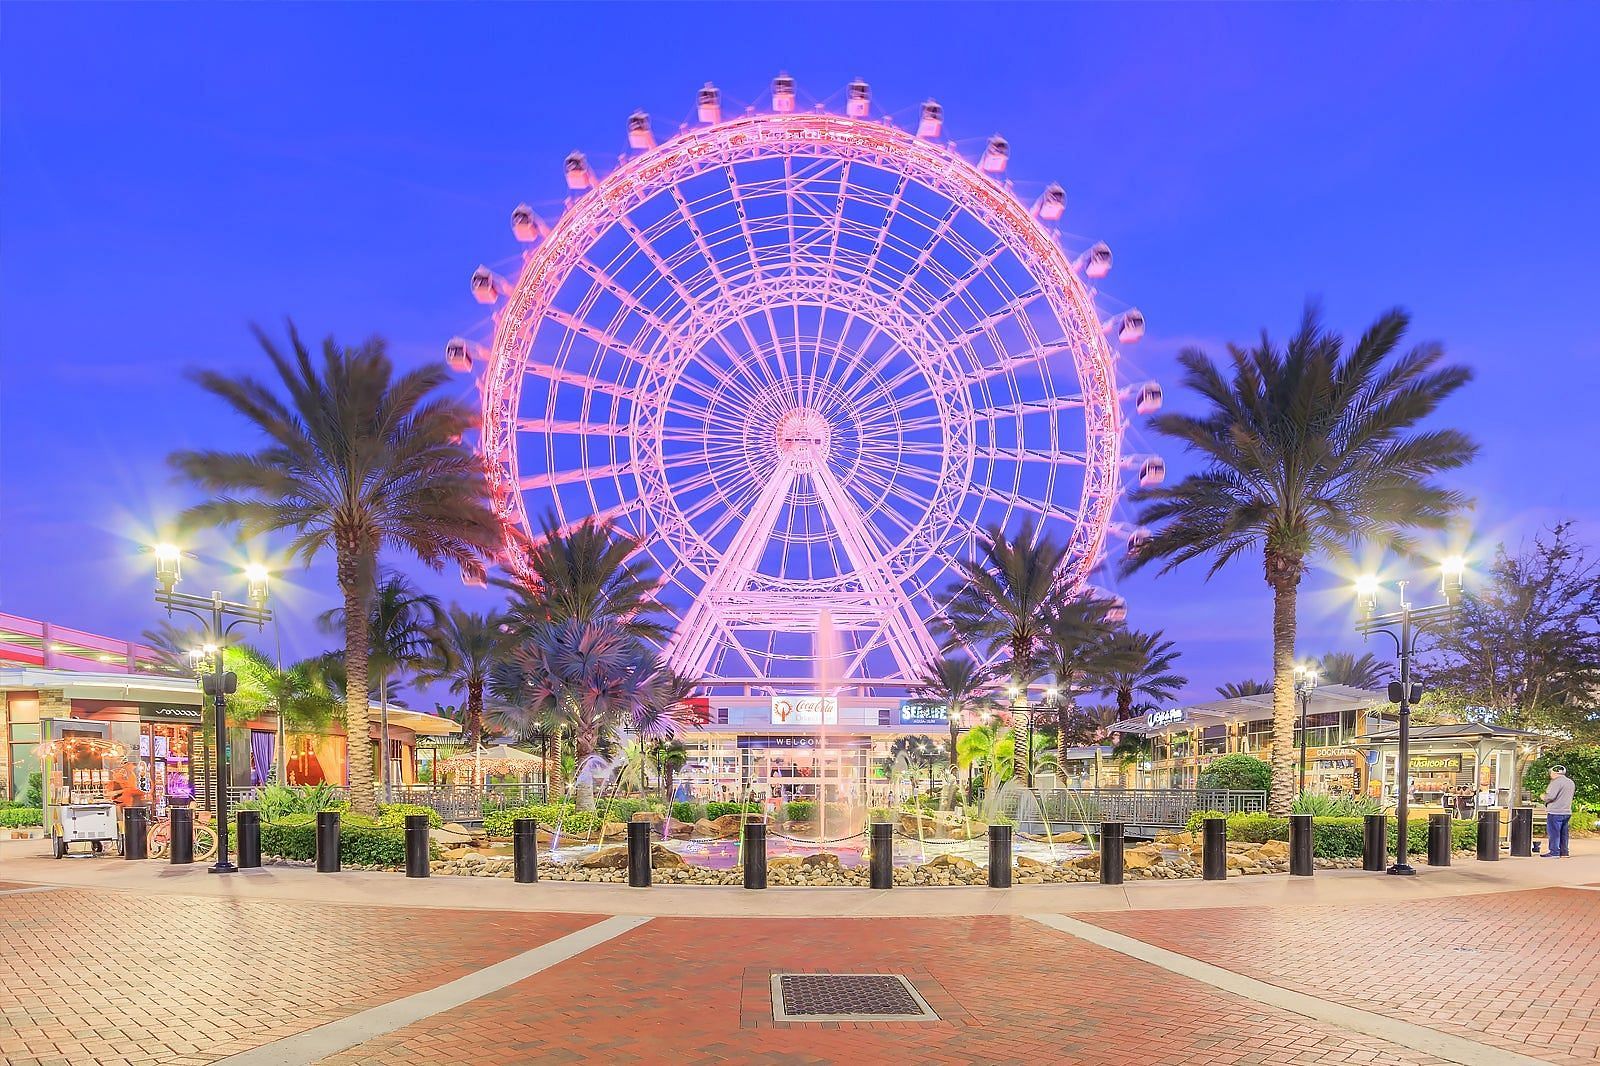 More than 60 riders were left stuck at a 400-ft-tall Ferris wheel at Orlando&rsquo;s ICON Park after the power went off on the night of 31st December 2022. (Image via ICON)